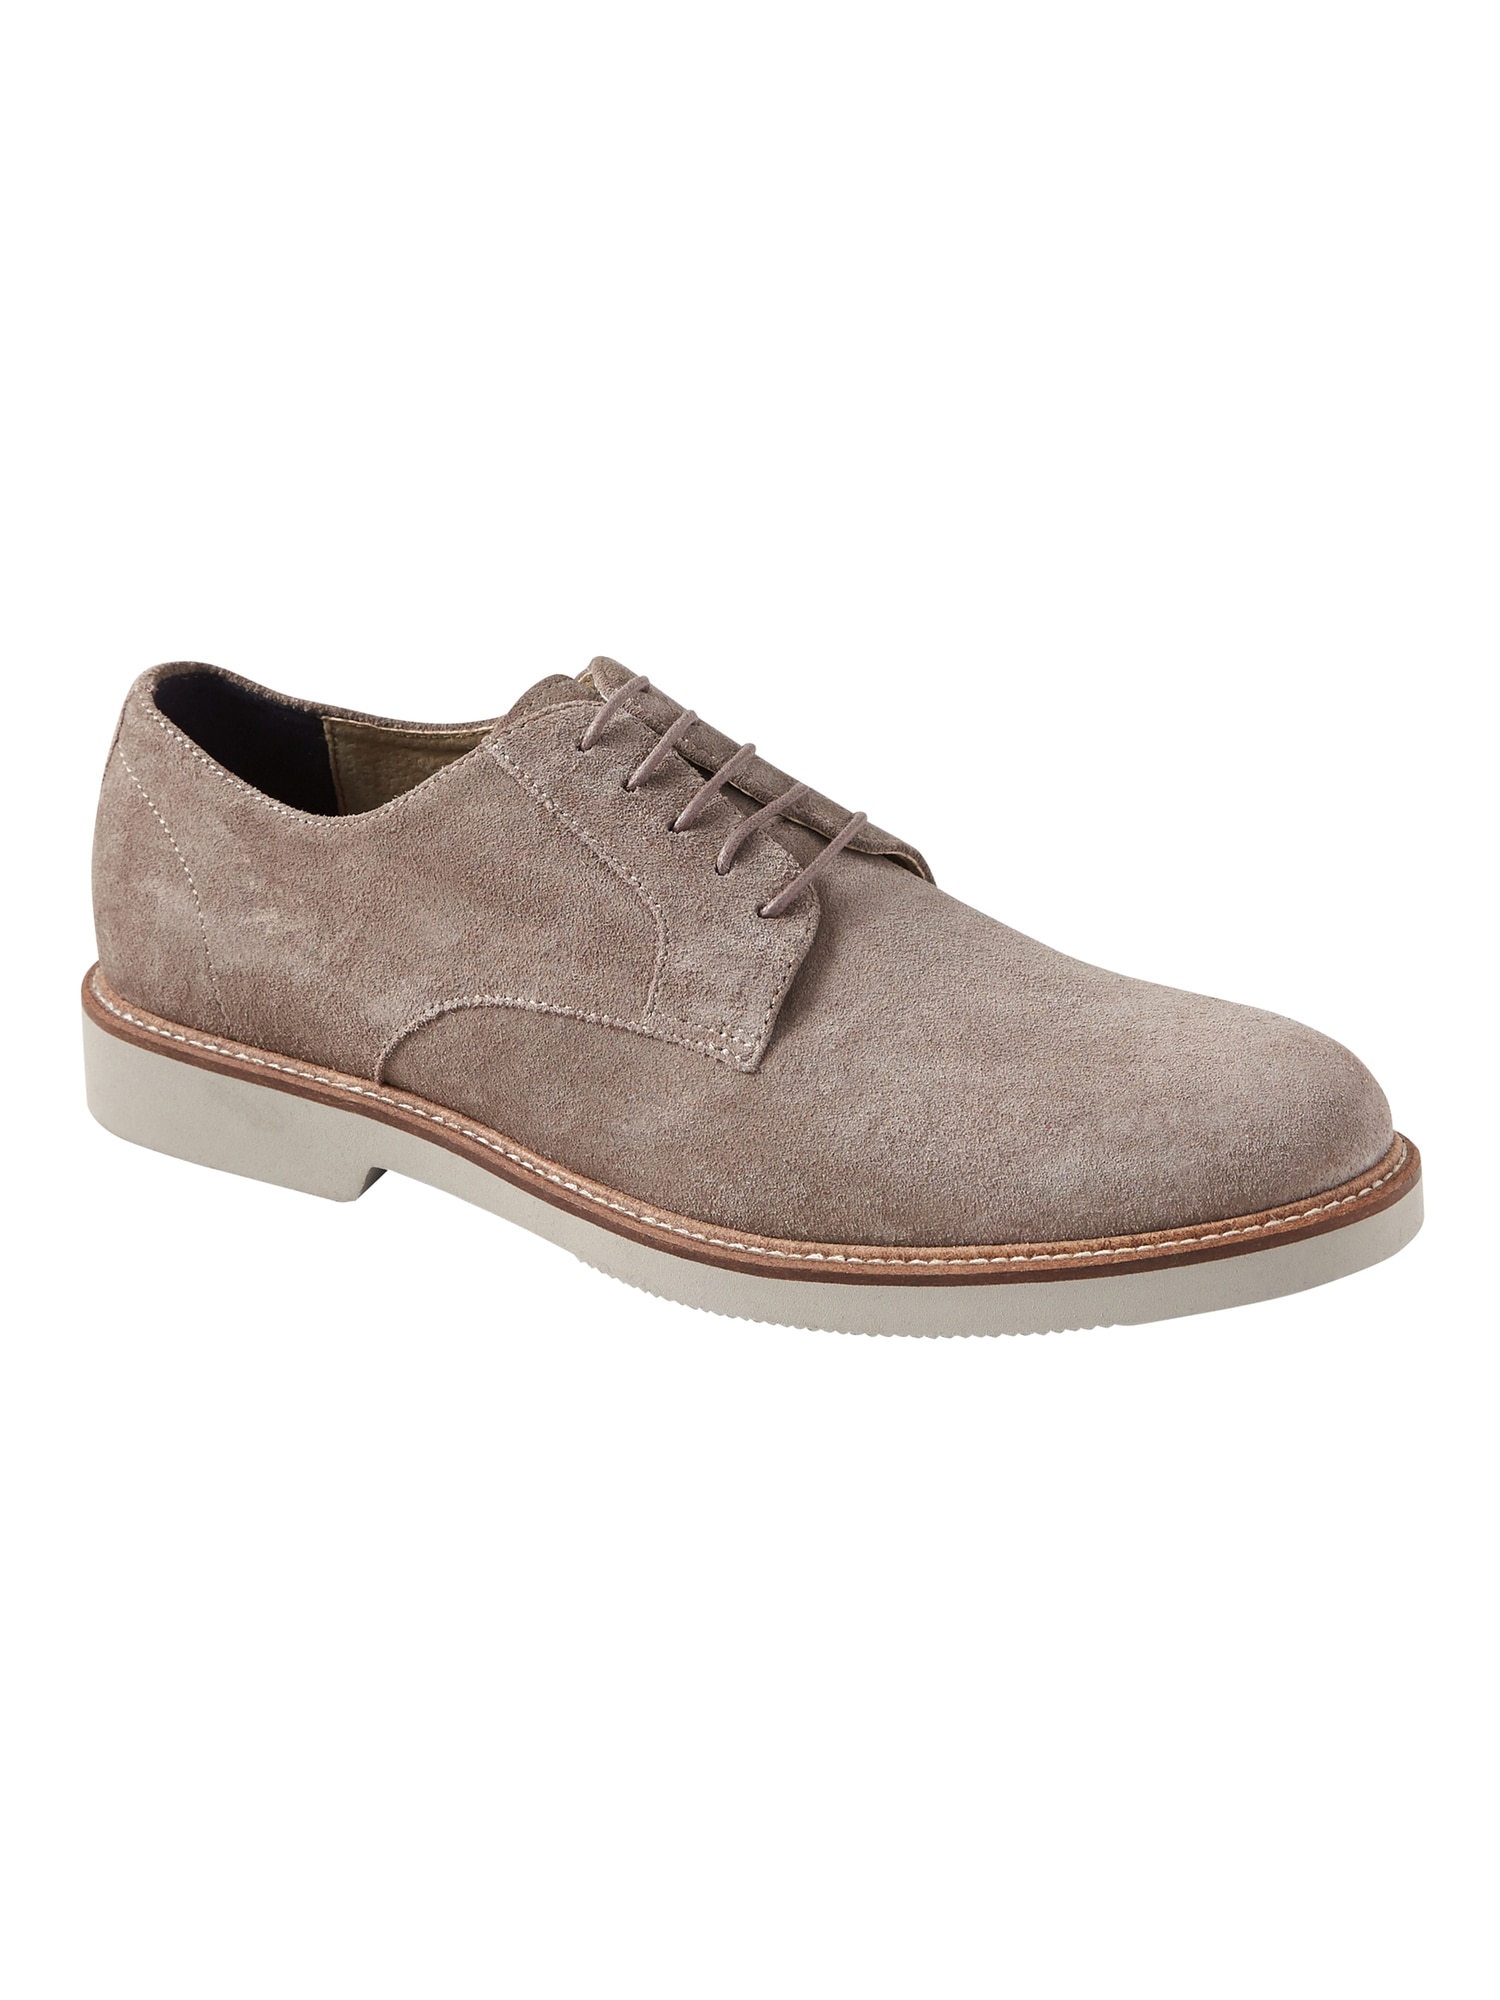 Nyle Italian Lace-Up Oxford